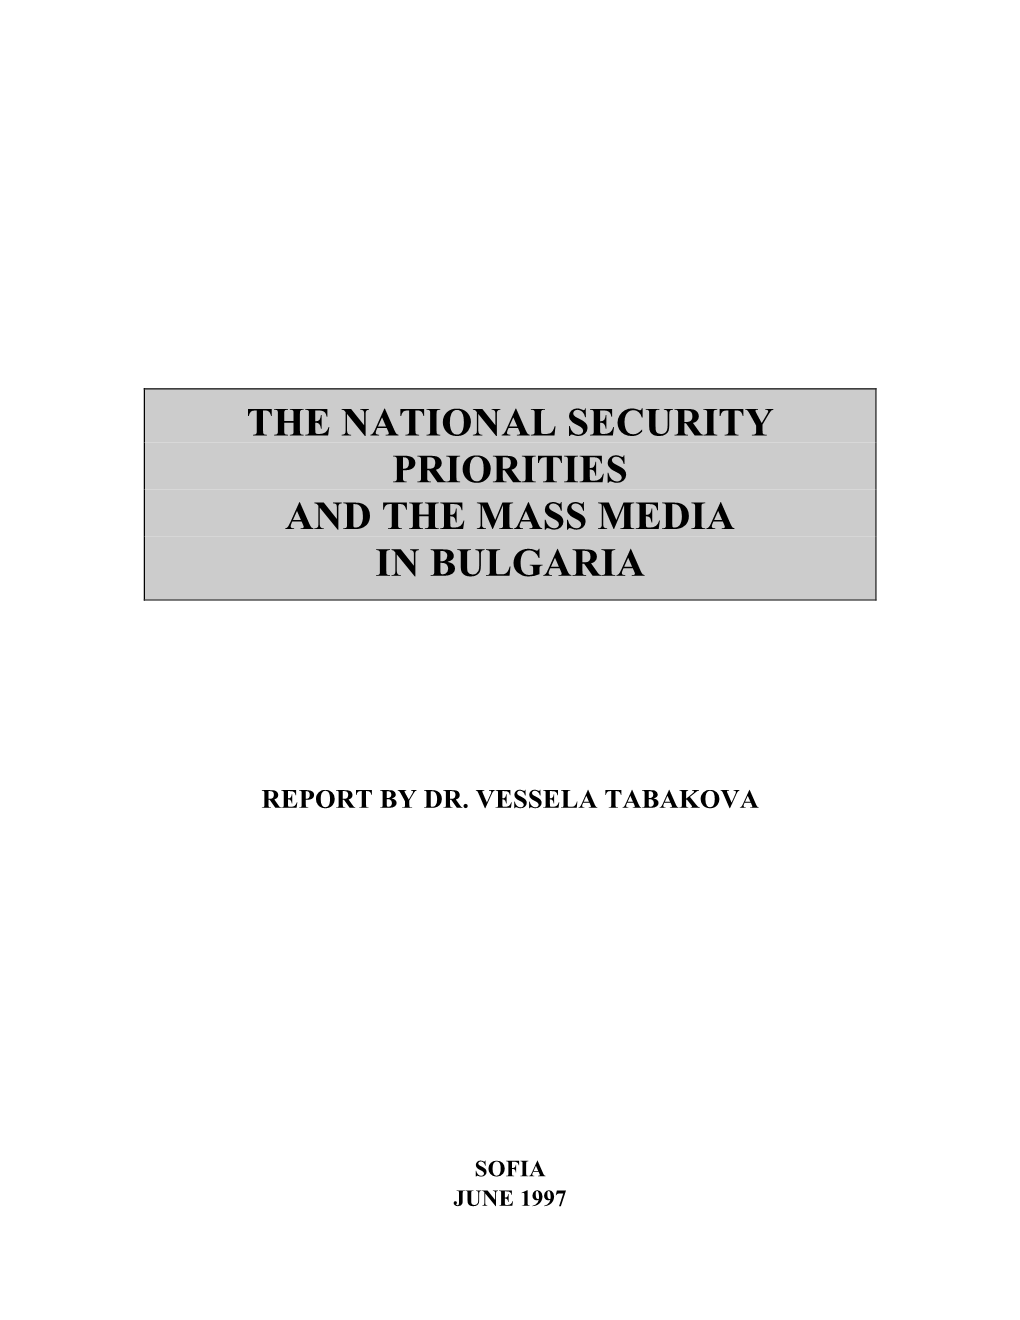 The National Security Priorities and the Mass Media in Bulgaria